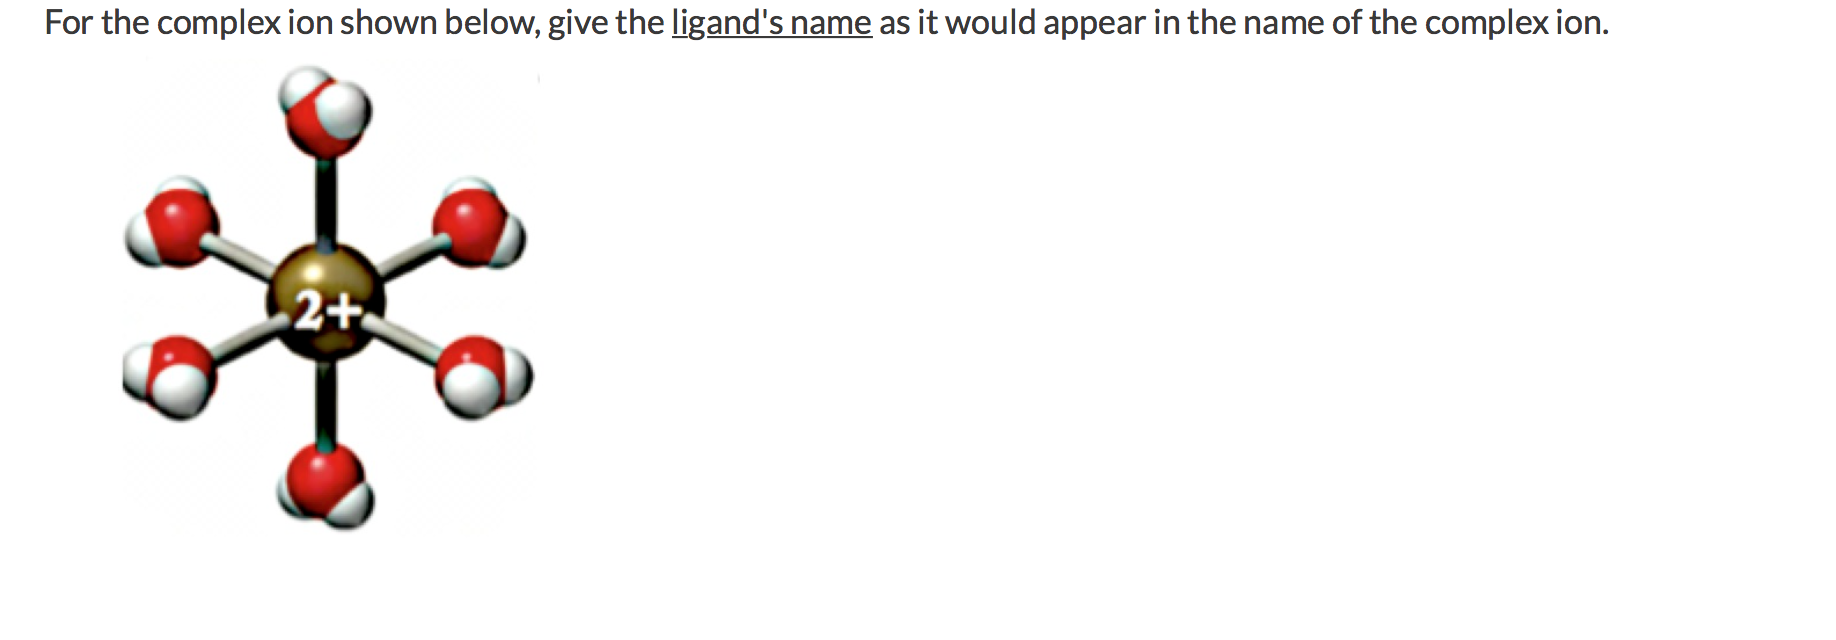 For the complex ion shown below, give the ligand's name as it would appear in the name of the complex ion.
2+
